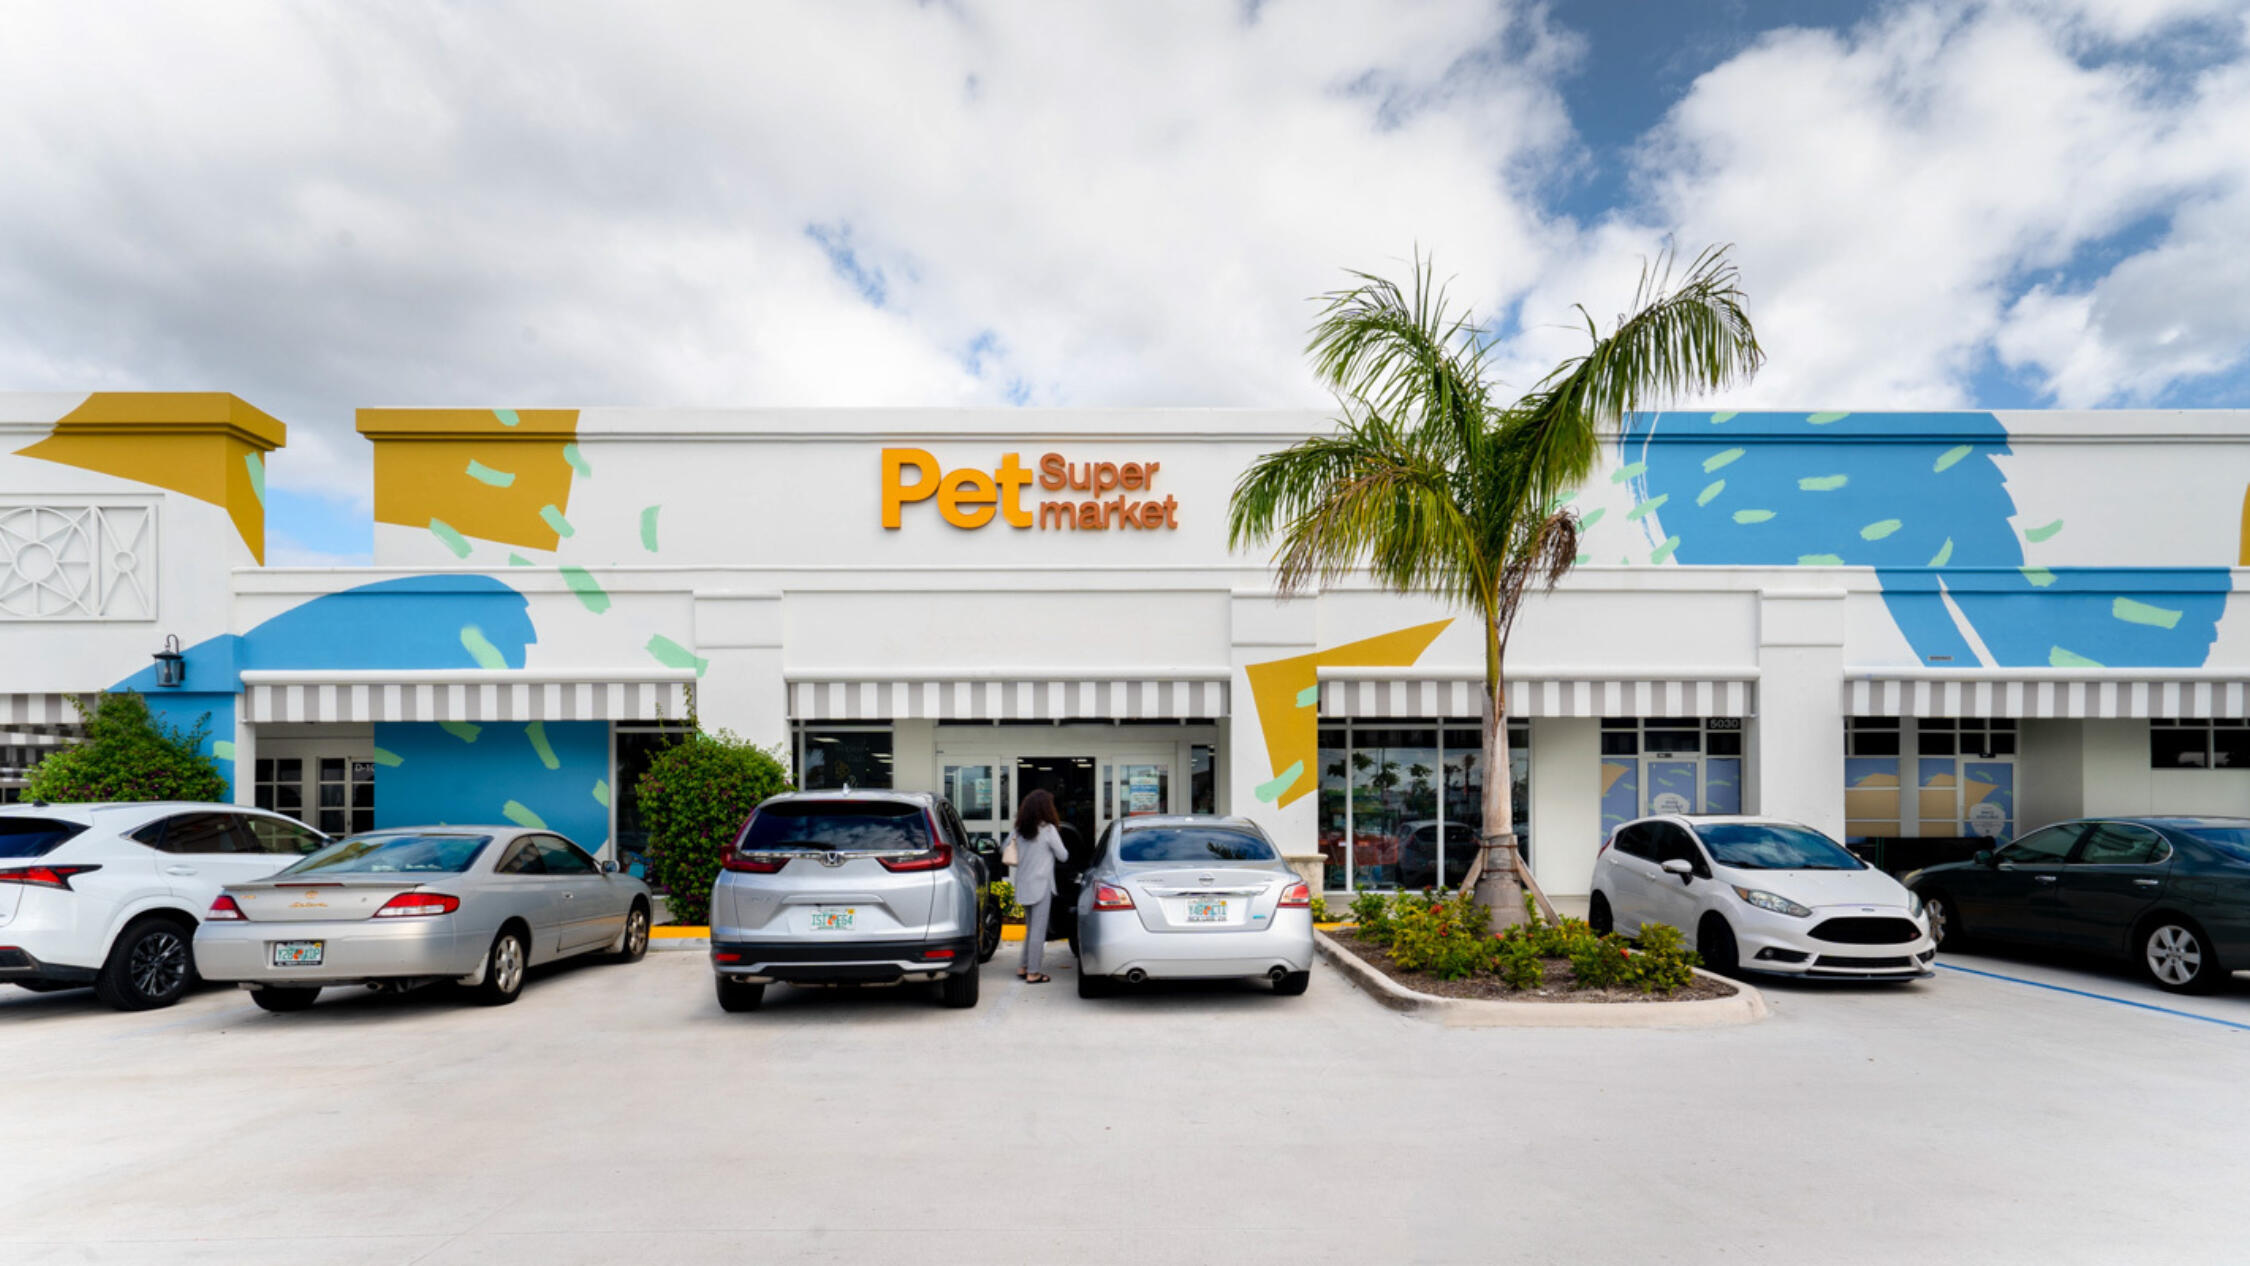 Pet Supermarket store facade at Polo Club Shops, with cars parked in spaces in front